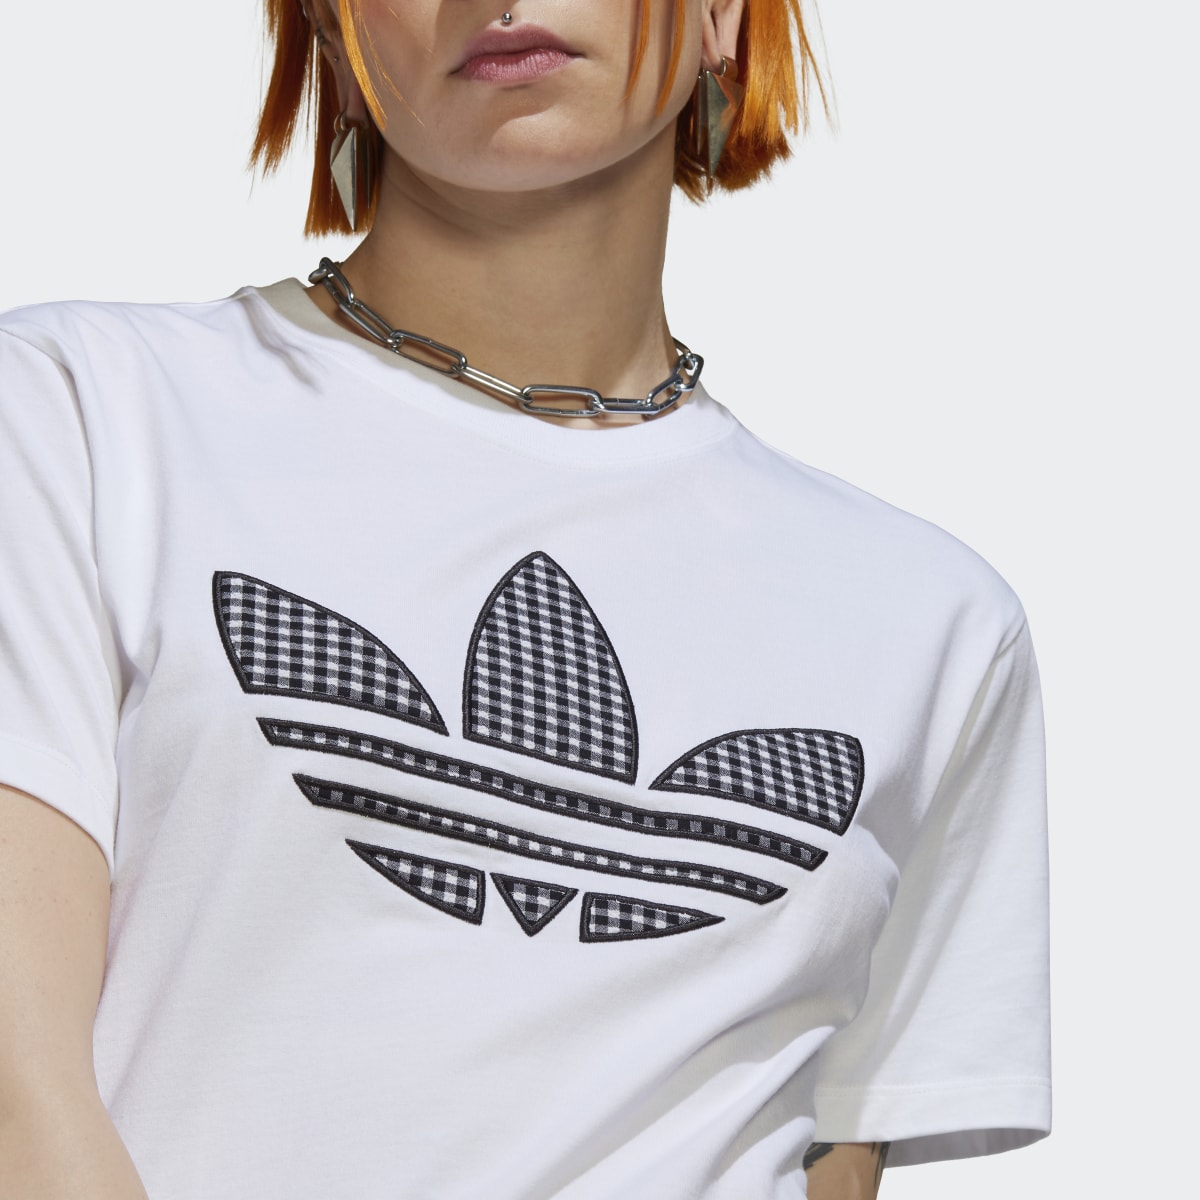 Adidas T-shirt with Trefoil Application. 8